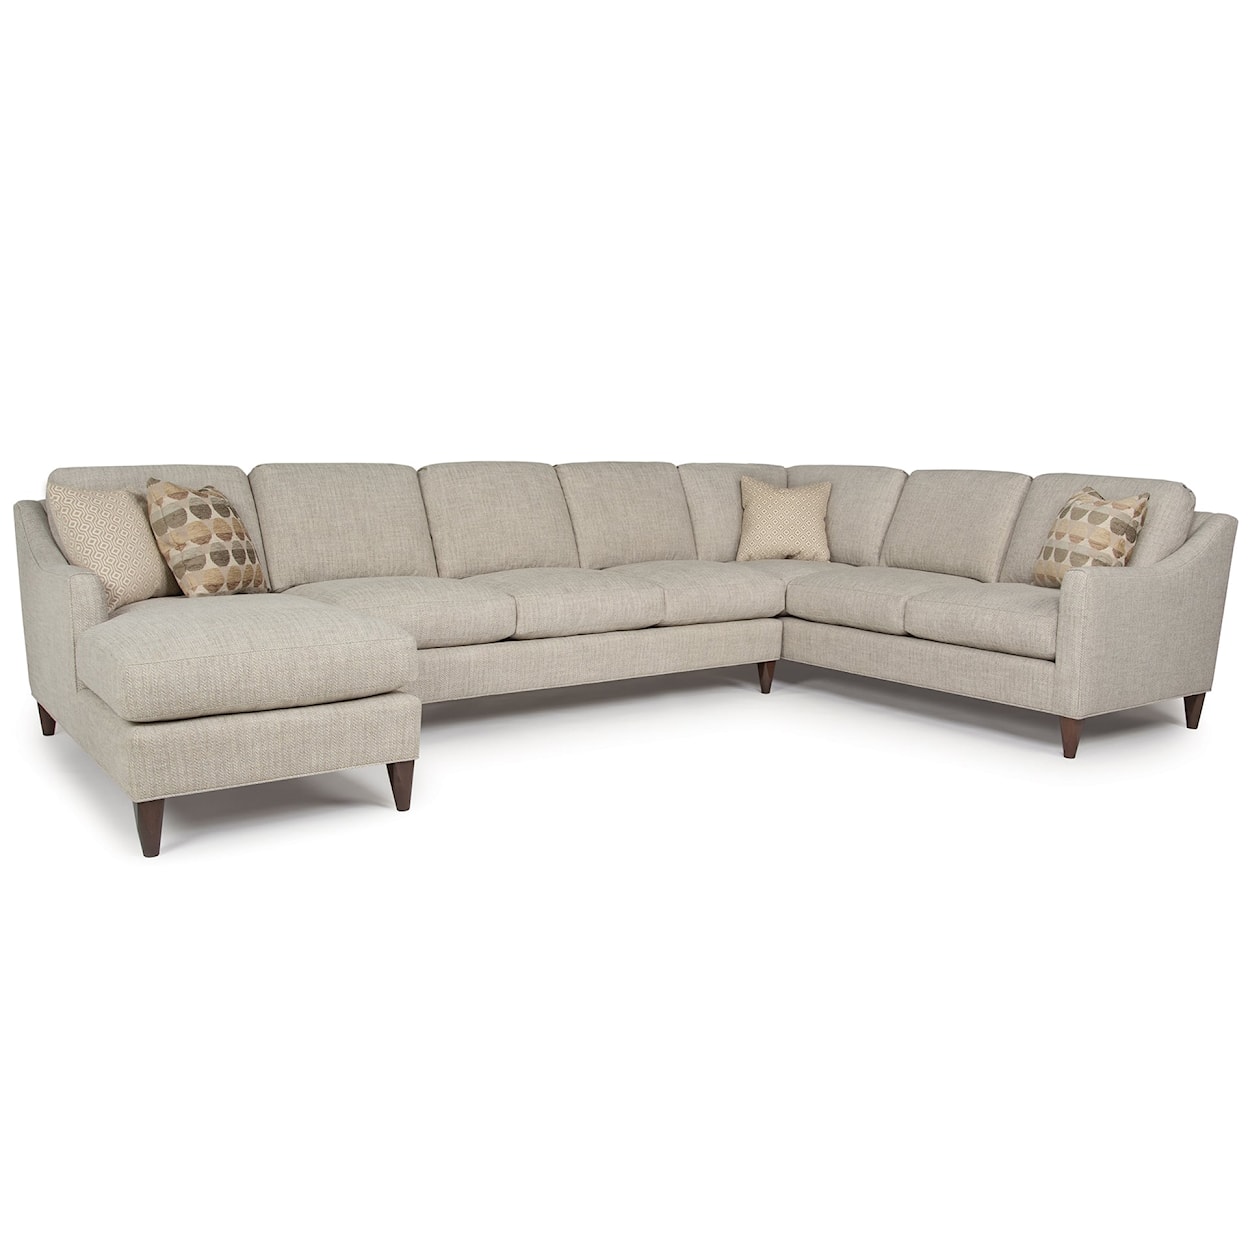 Smith Brothers 261 Sectional